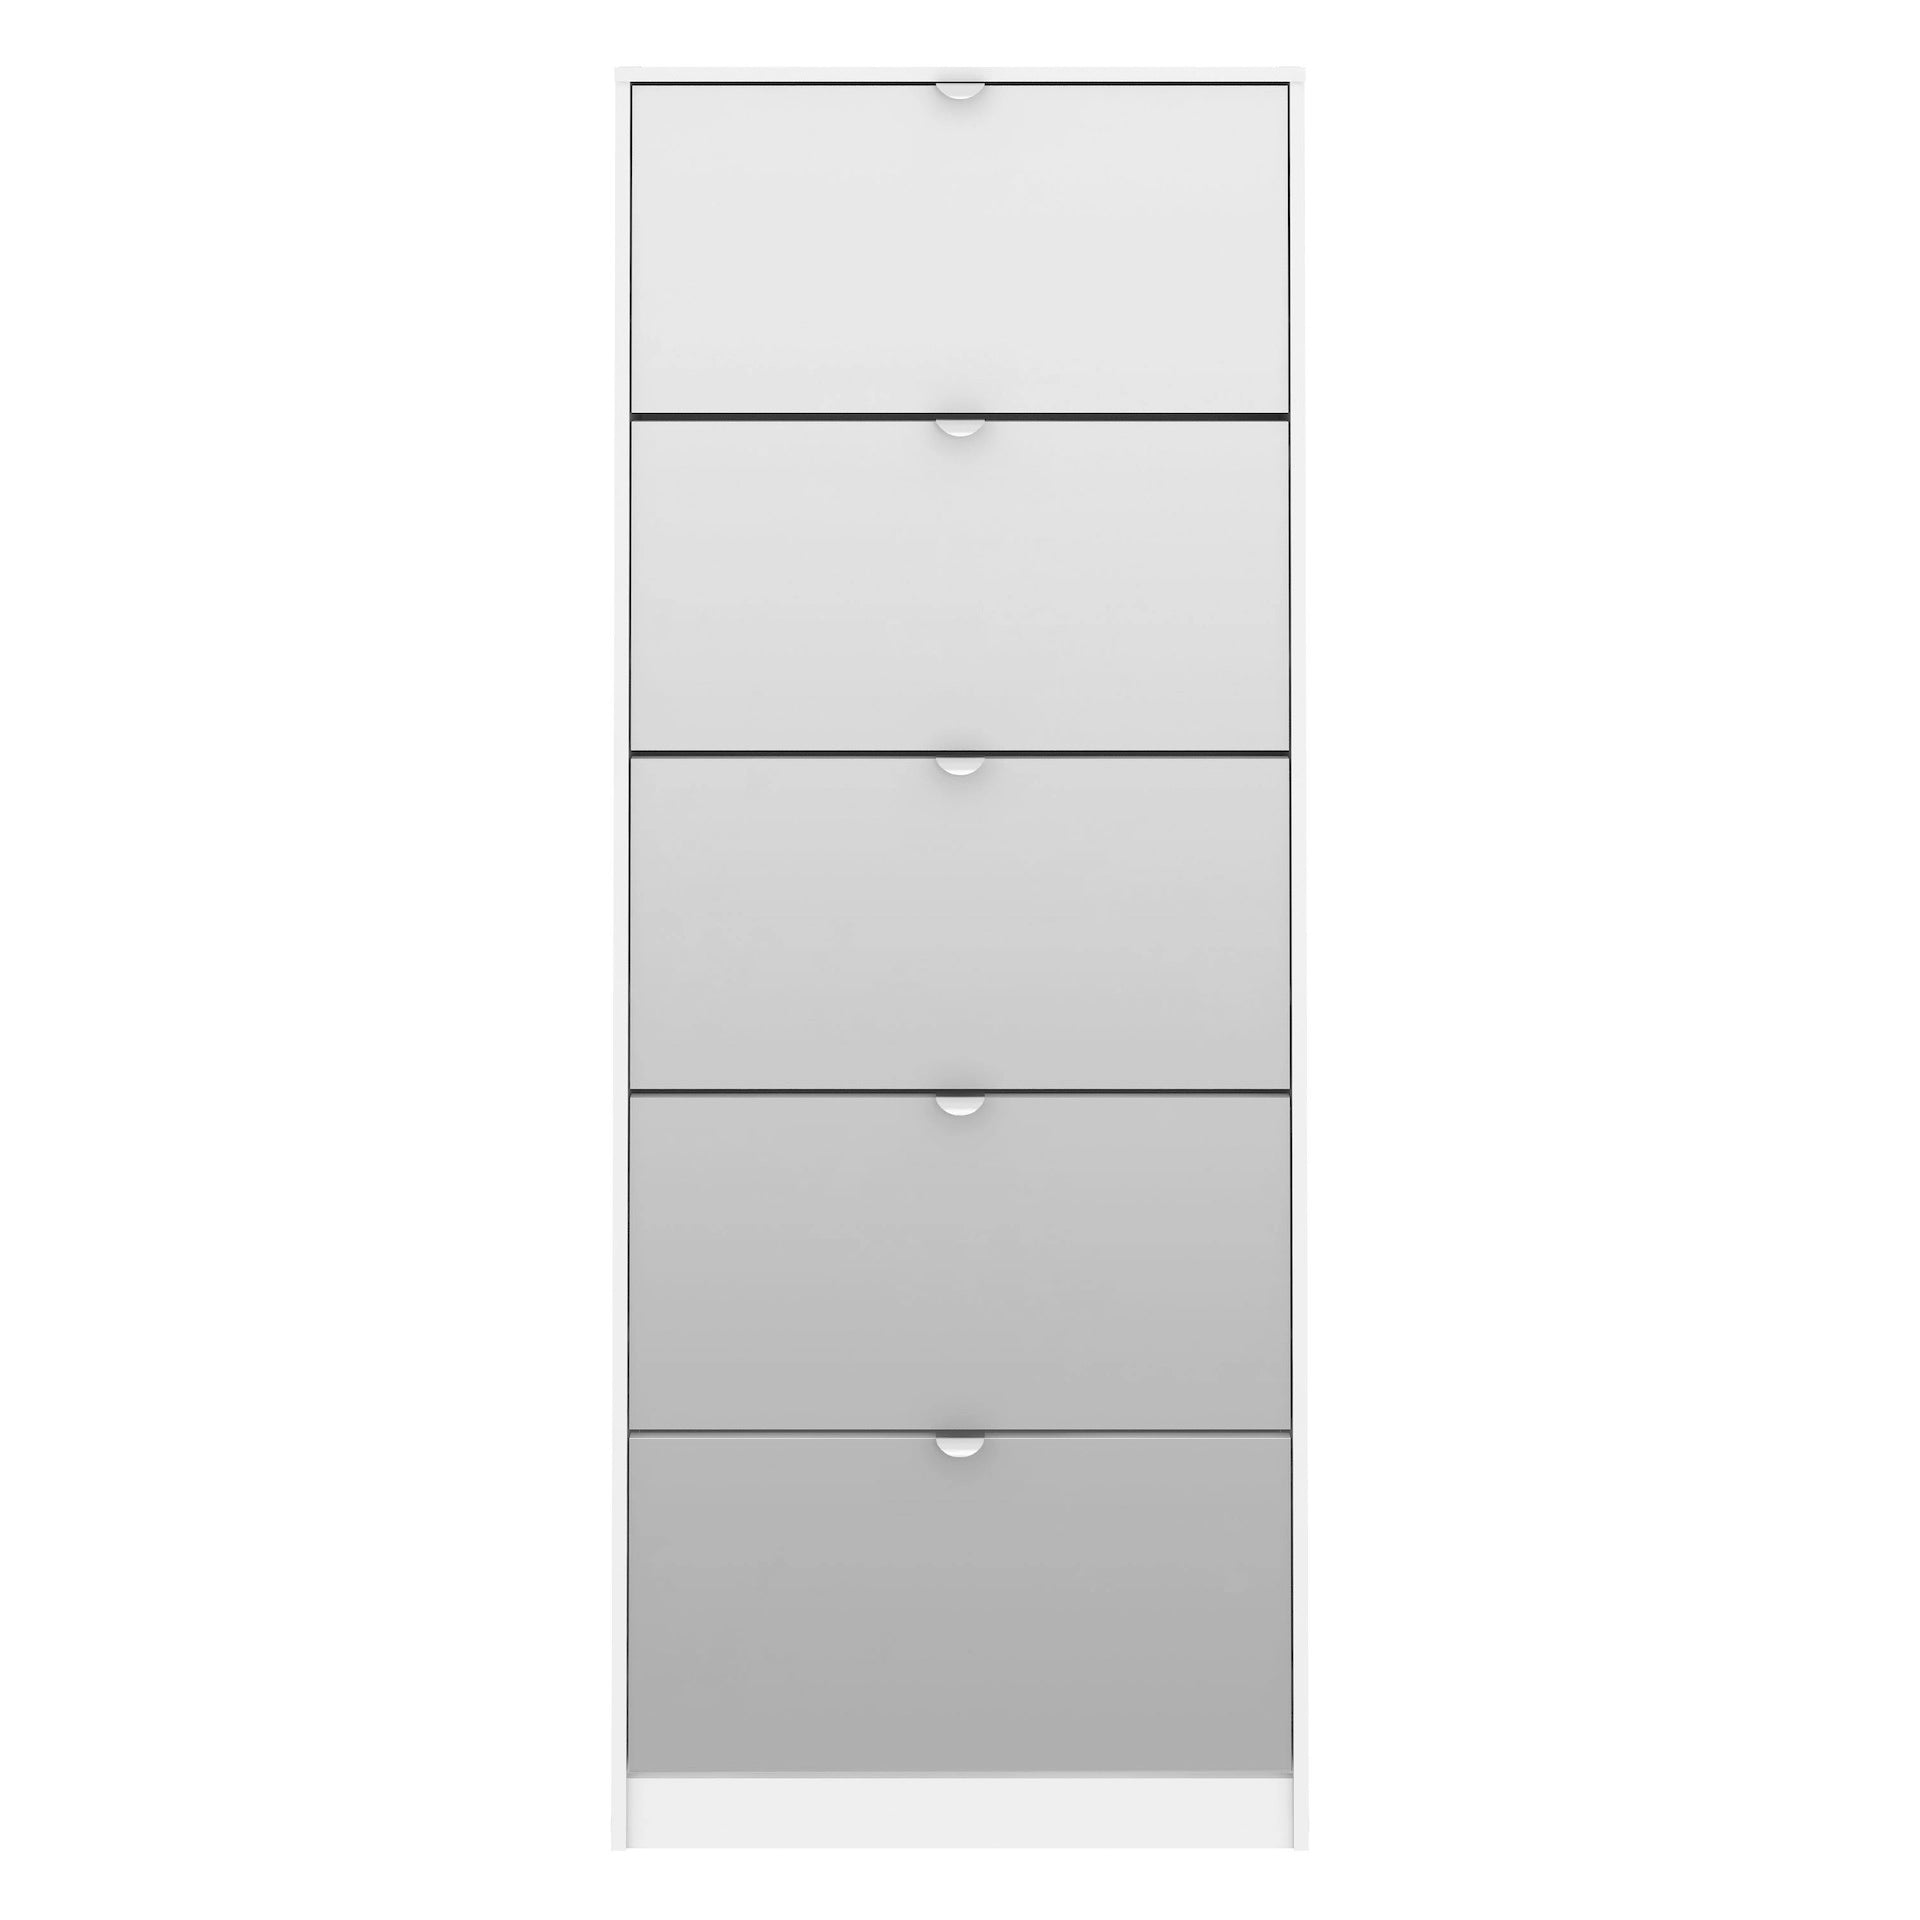 Furniture To Go Shoes Shoe Cabinet 5 Mirror Tilting Doors in White